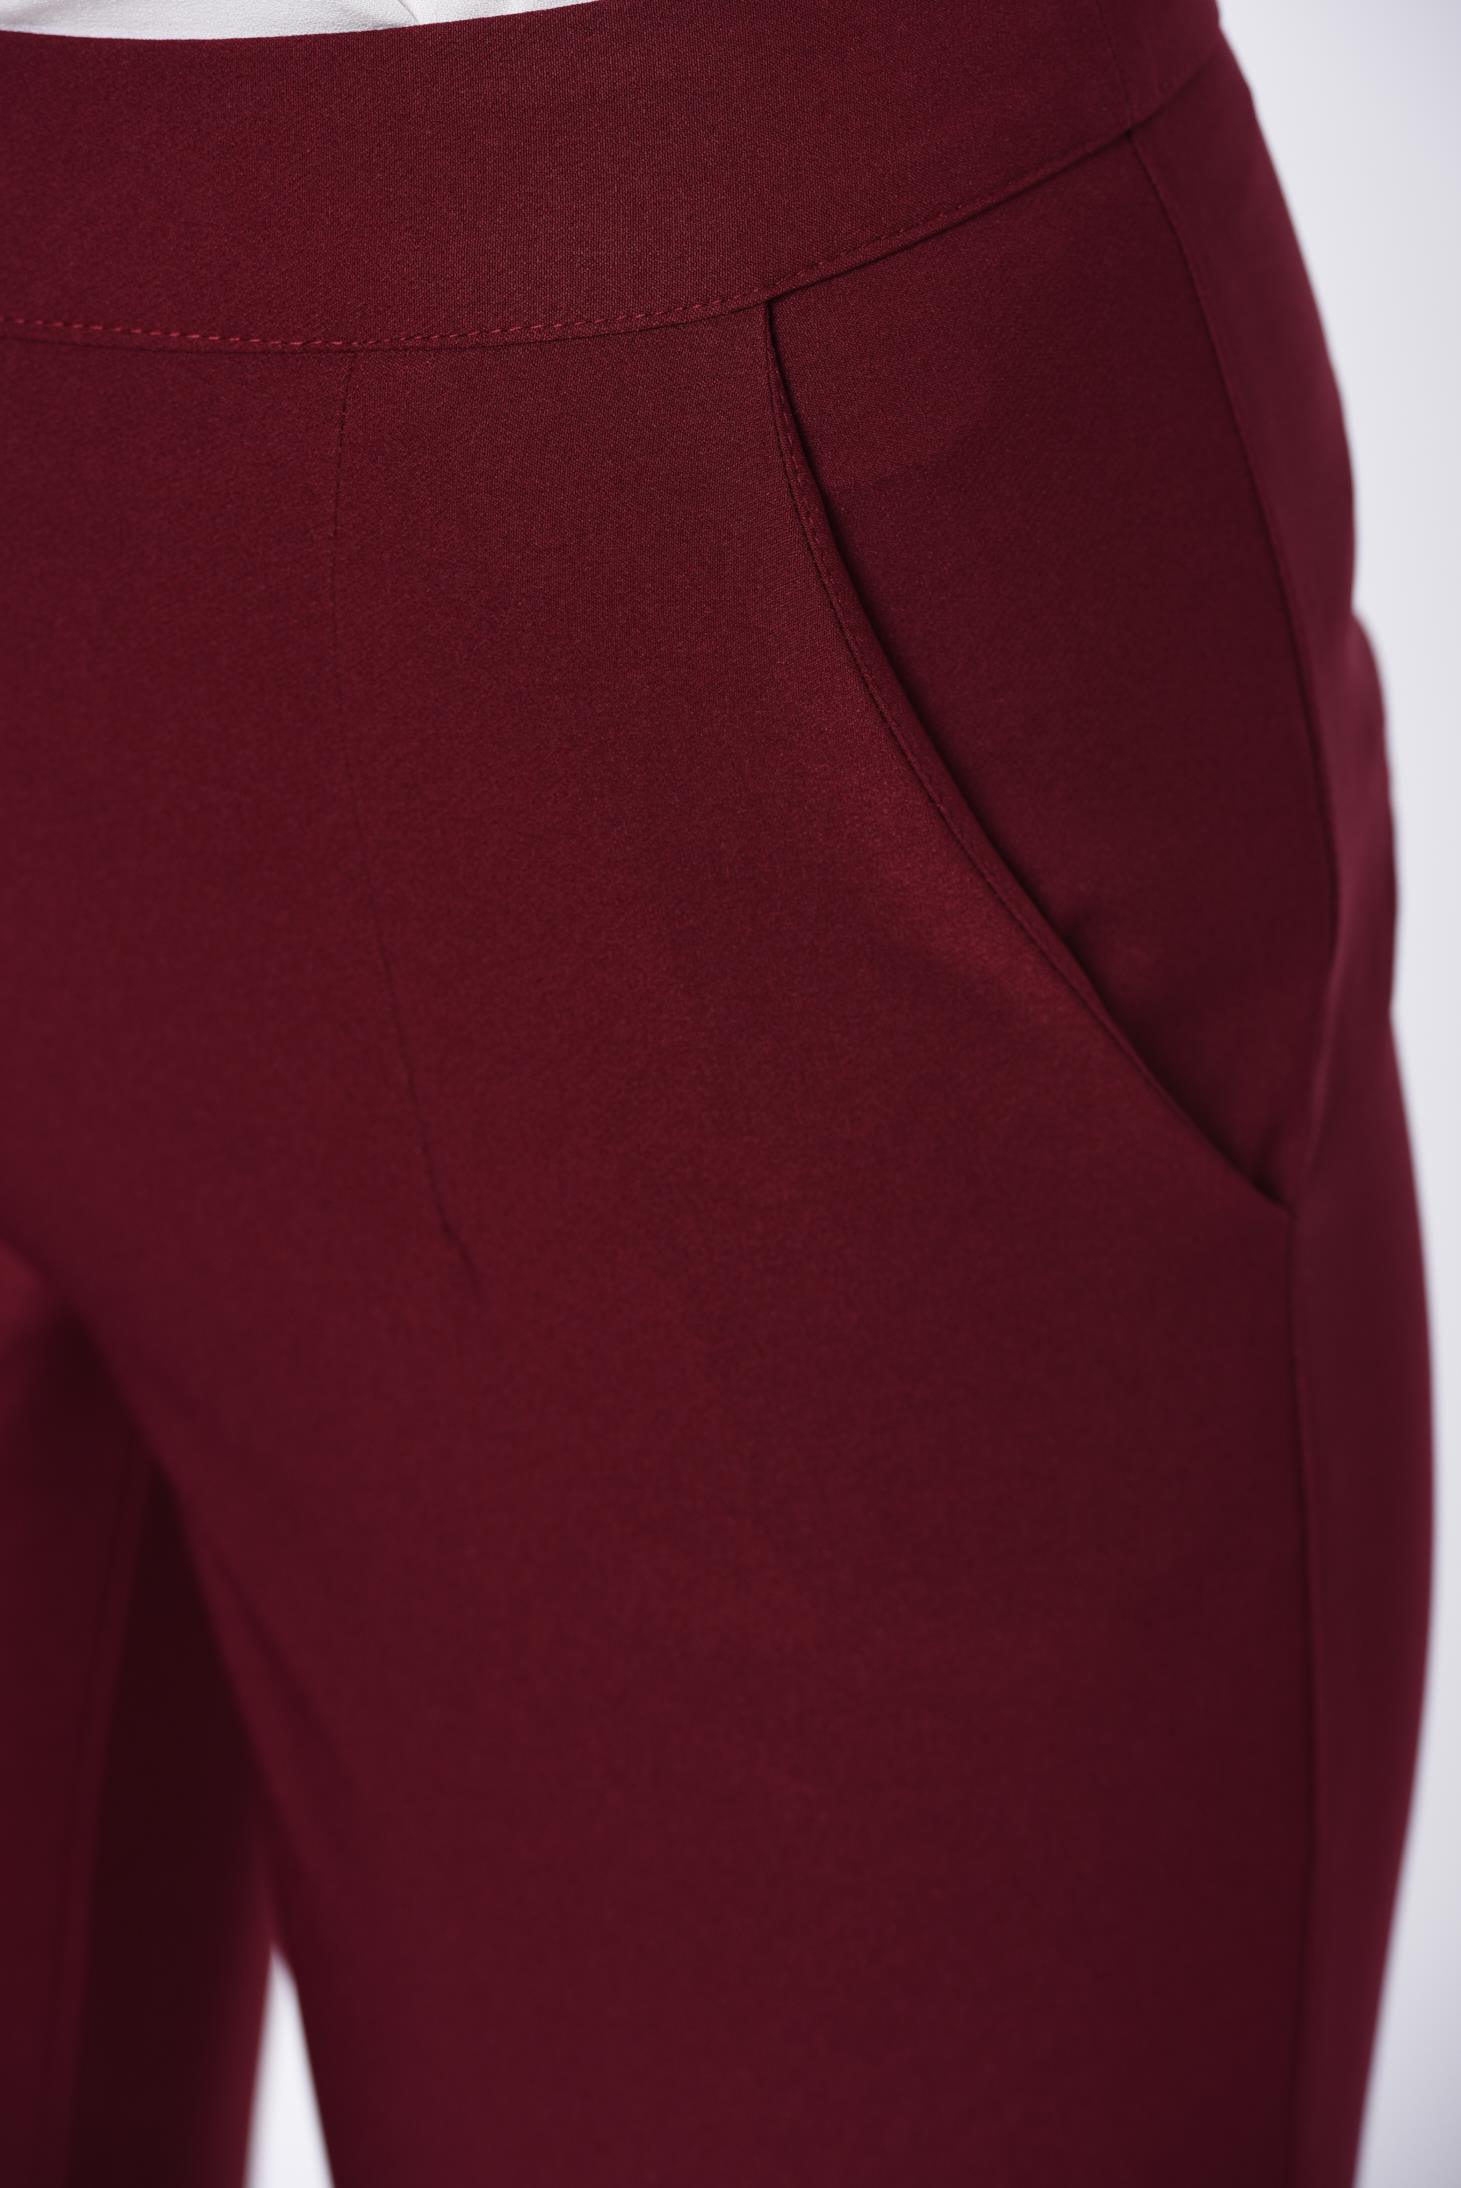 StarShinerS burgundy office trousers with pockets medium waist slightly elastic fabric with straight cut 4 - StarShinerS.com